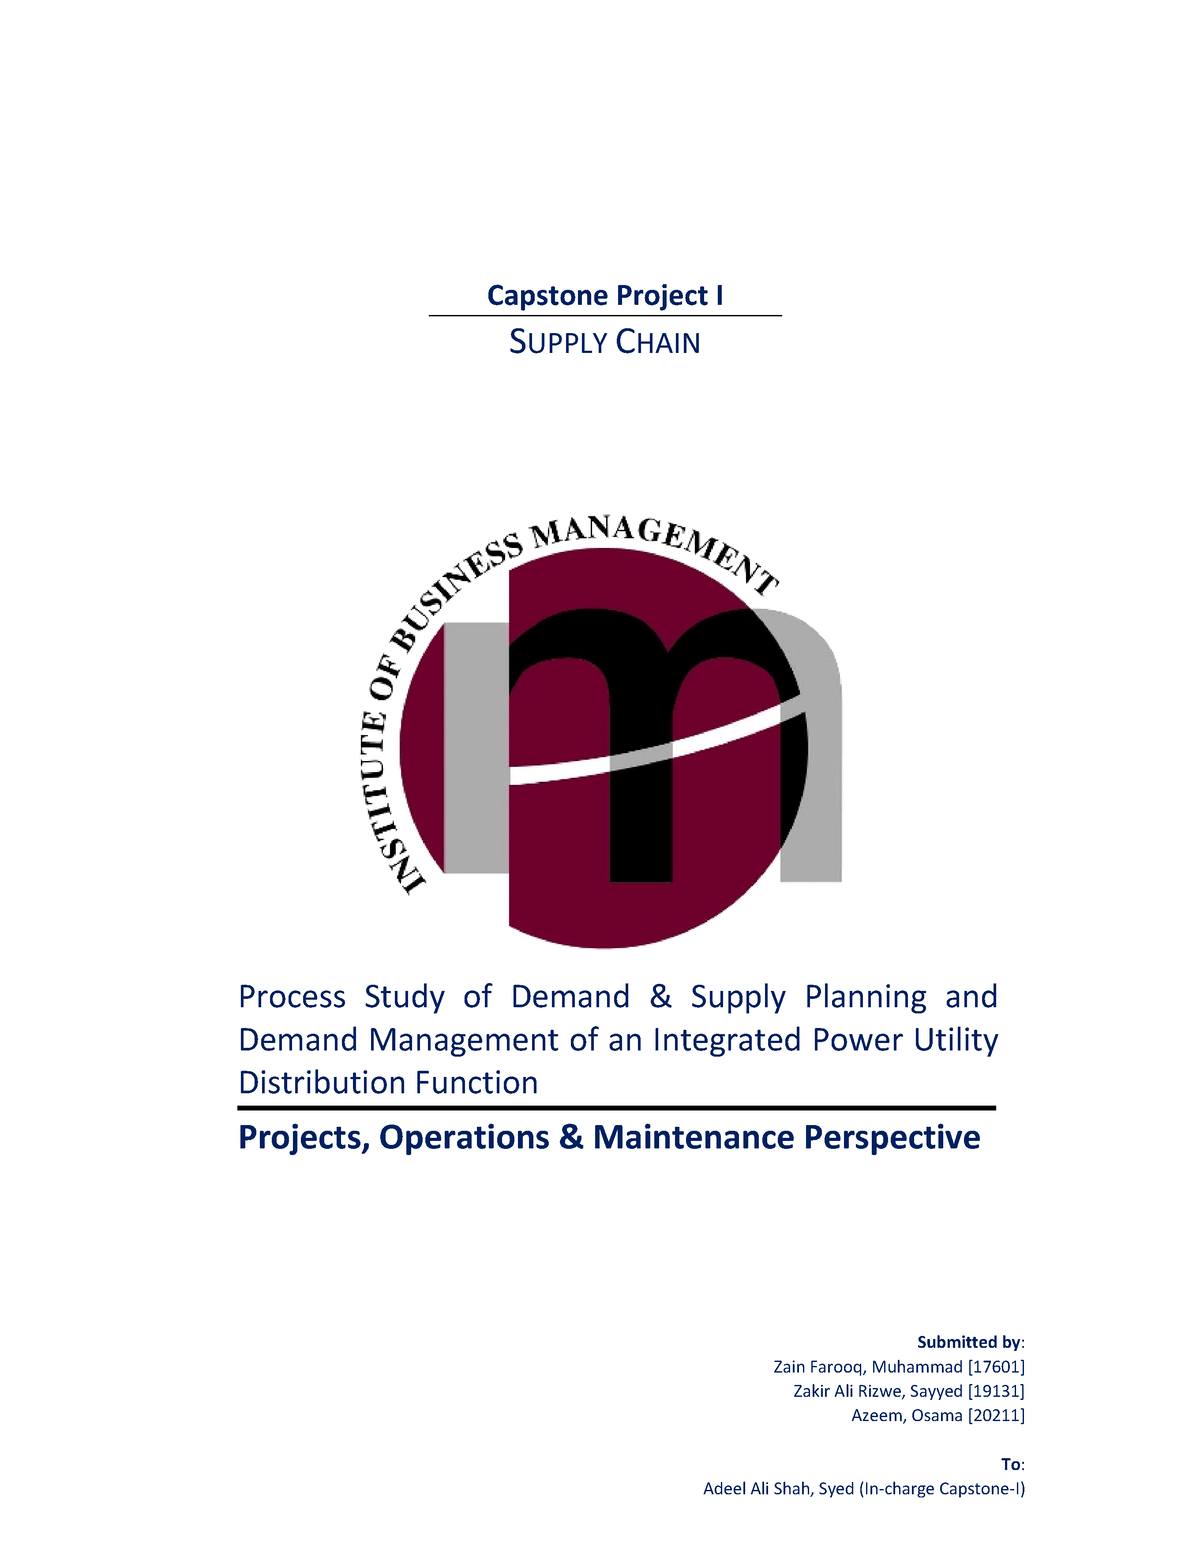 capstone project supply chain management